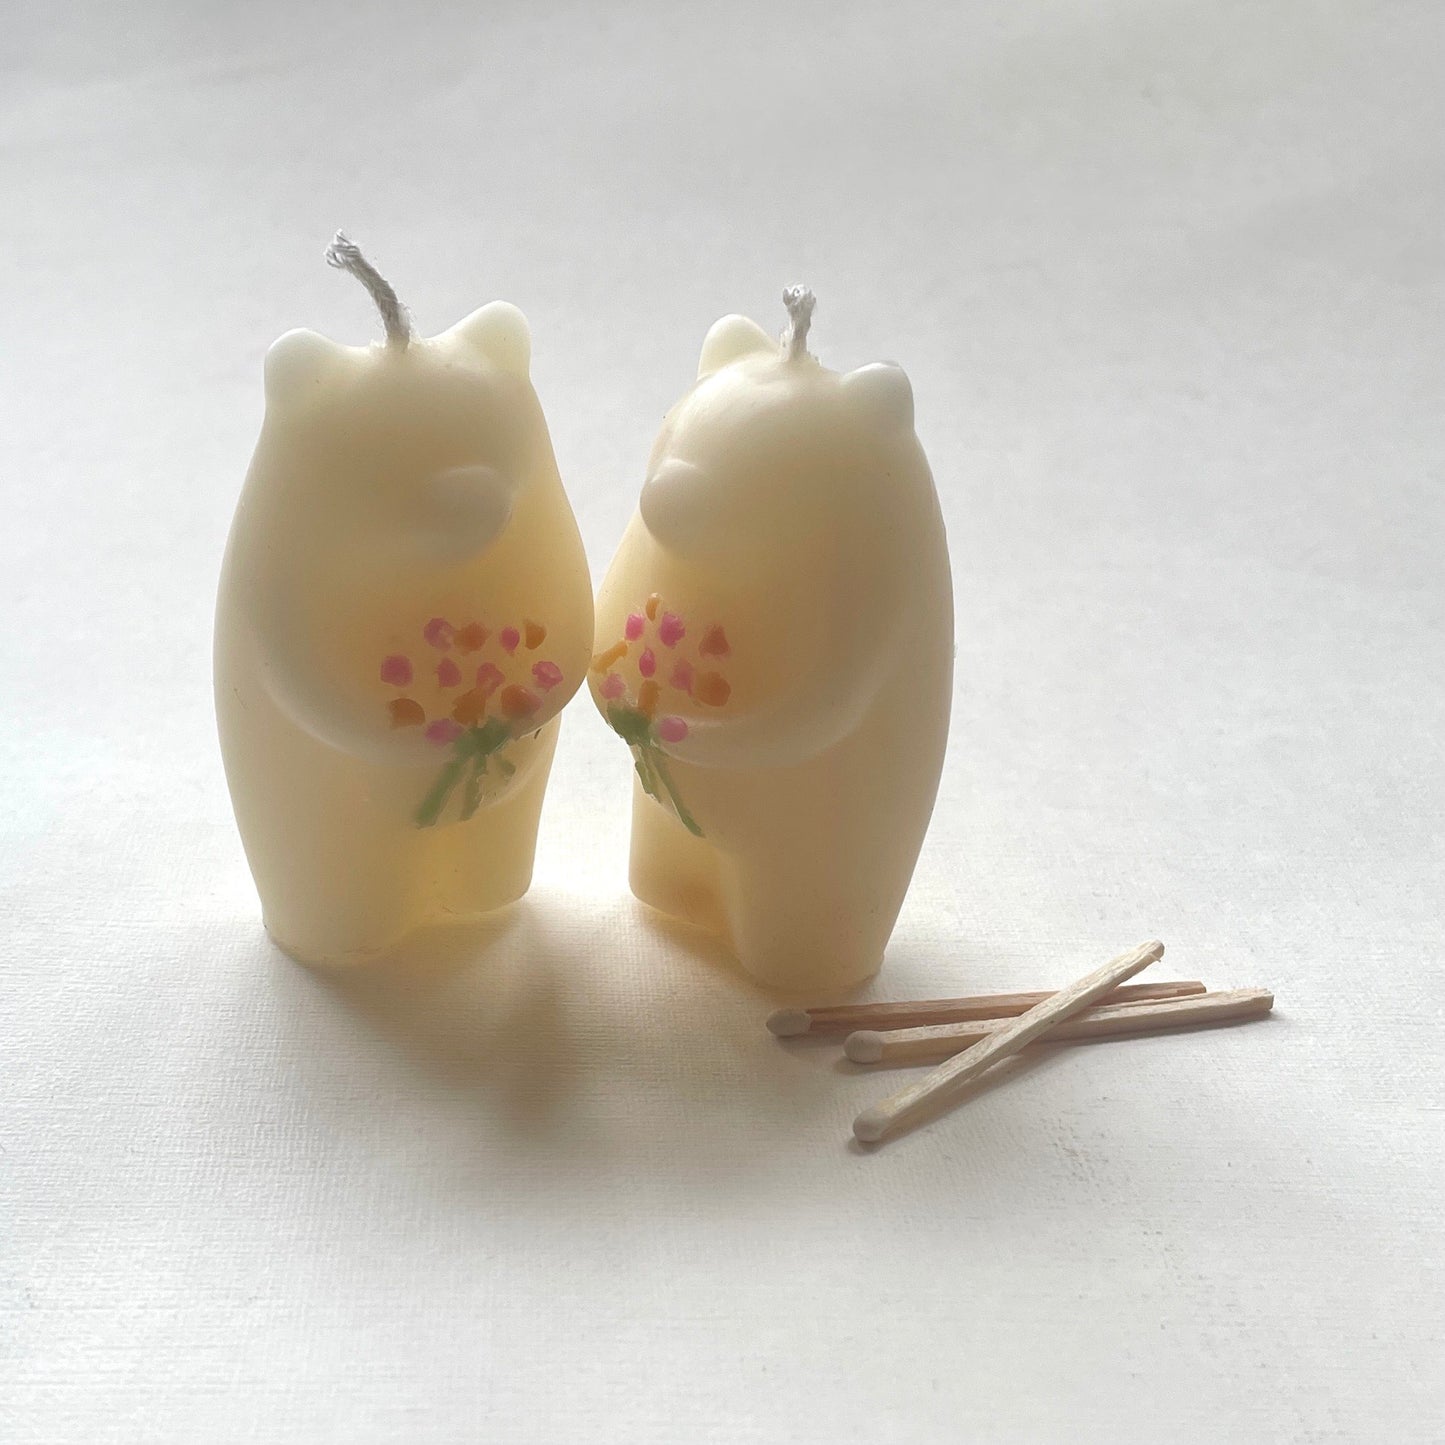 Beeswax Bear Candle - 100% Beeswax in Off-White // ONE Bear, Candle, Valentine's Day, Beeswax Candle, Love, Handpainted